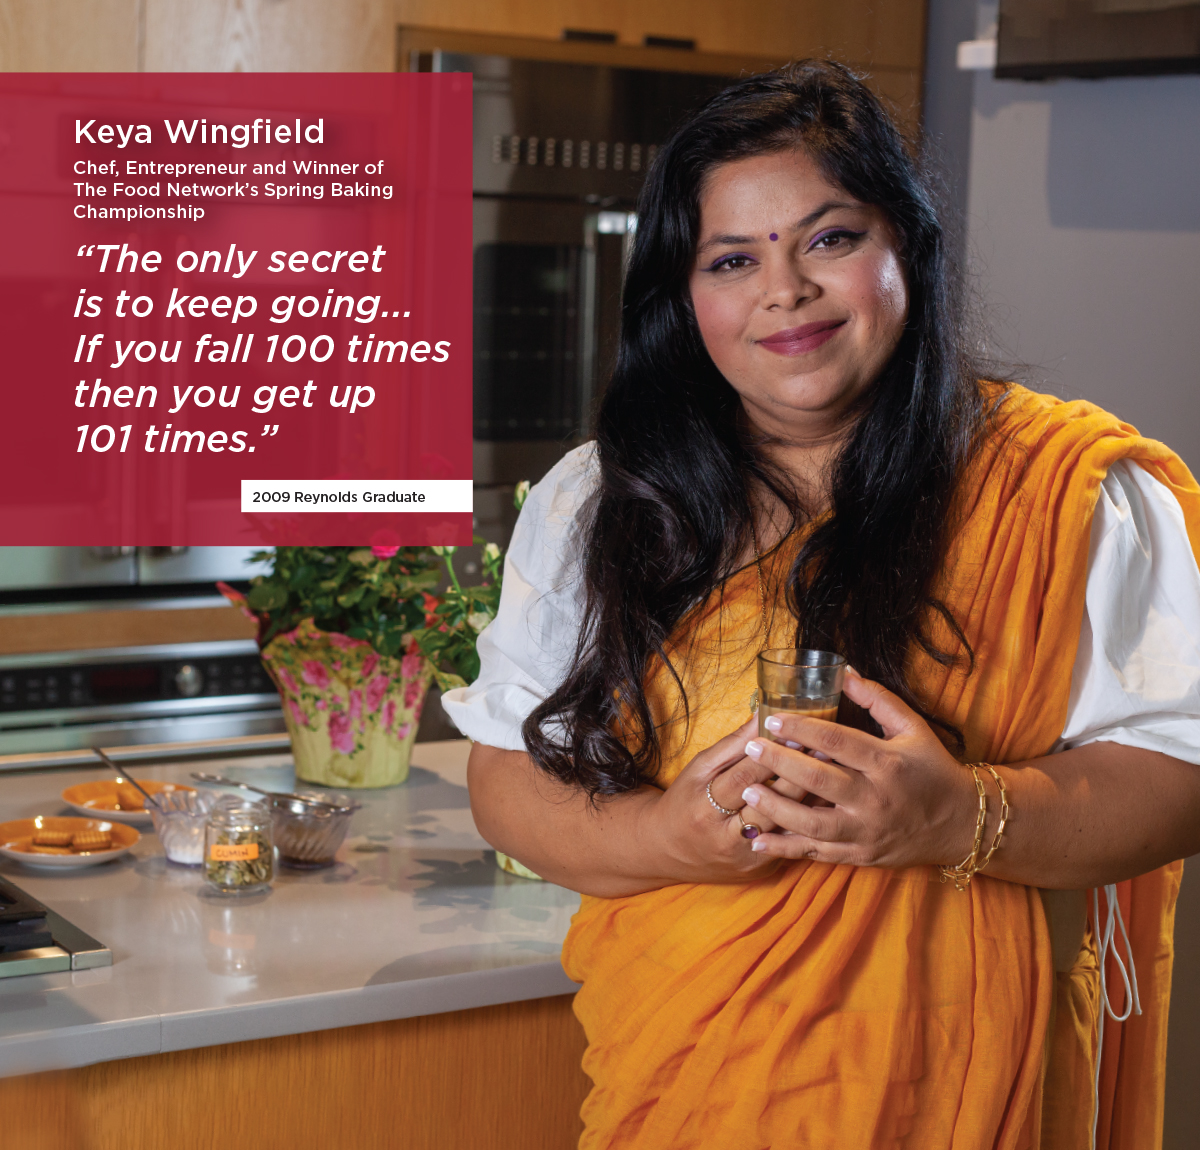 Indian woman, Keya Wingfield poses in Indian dress in industrial kitchen